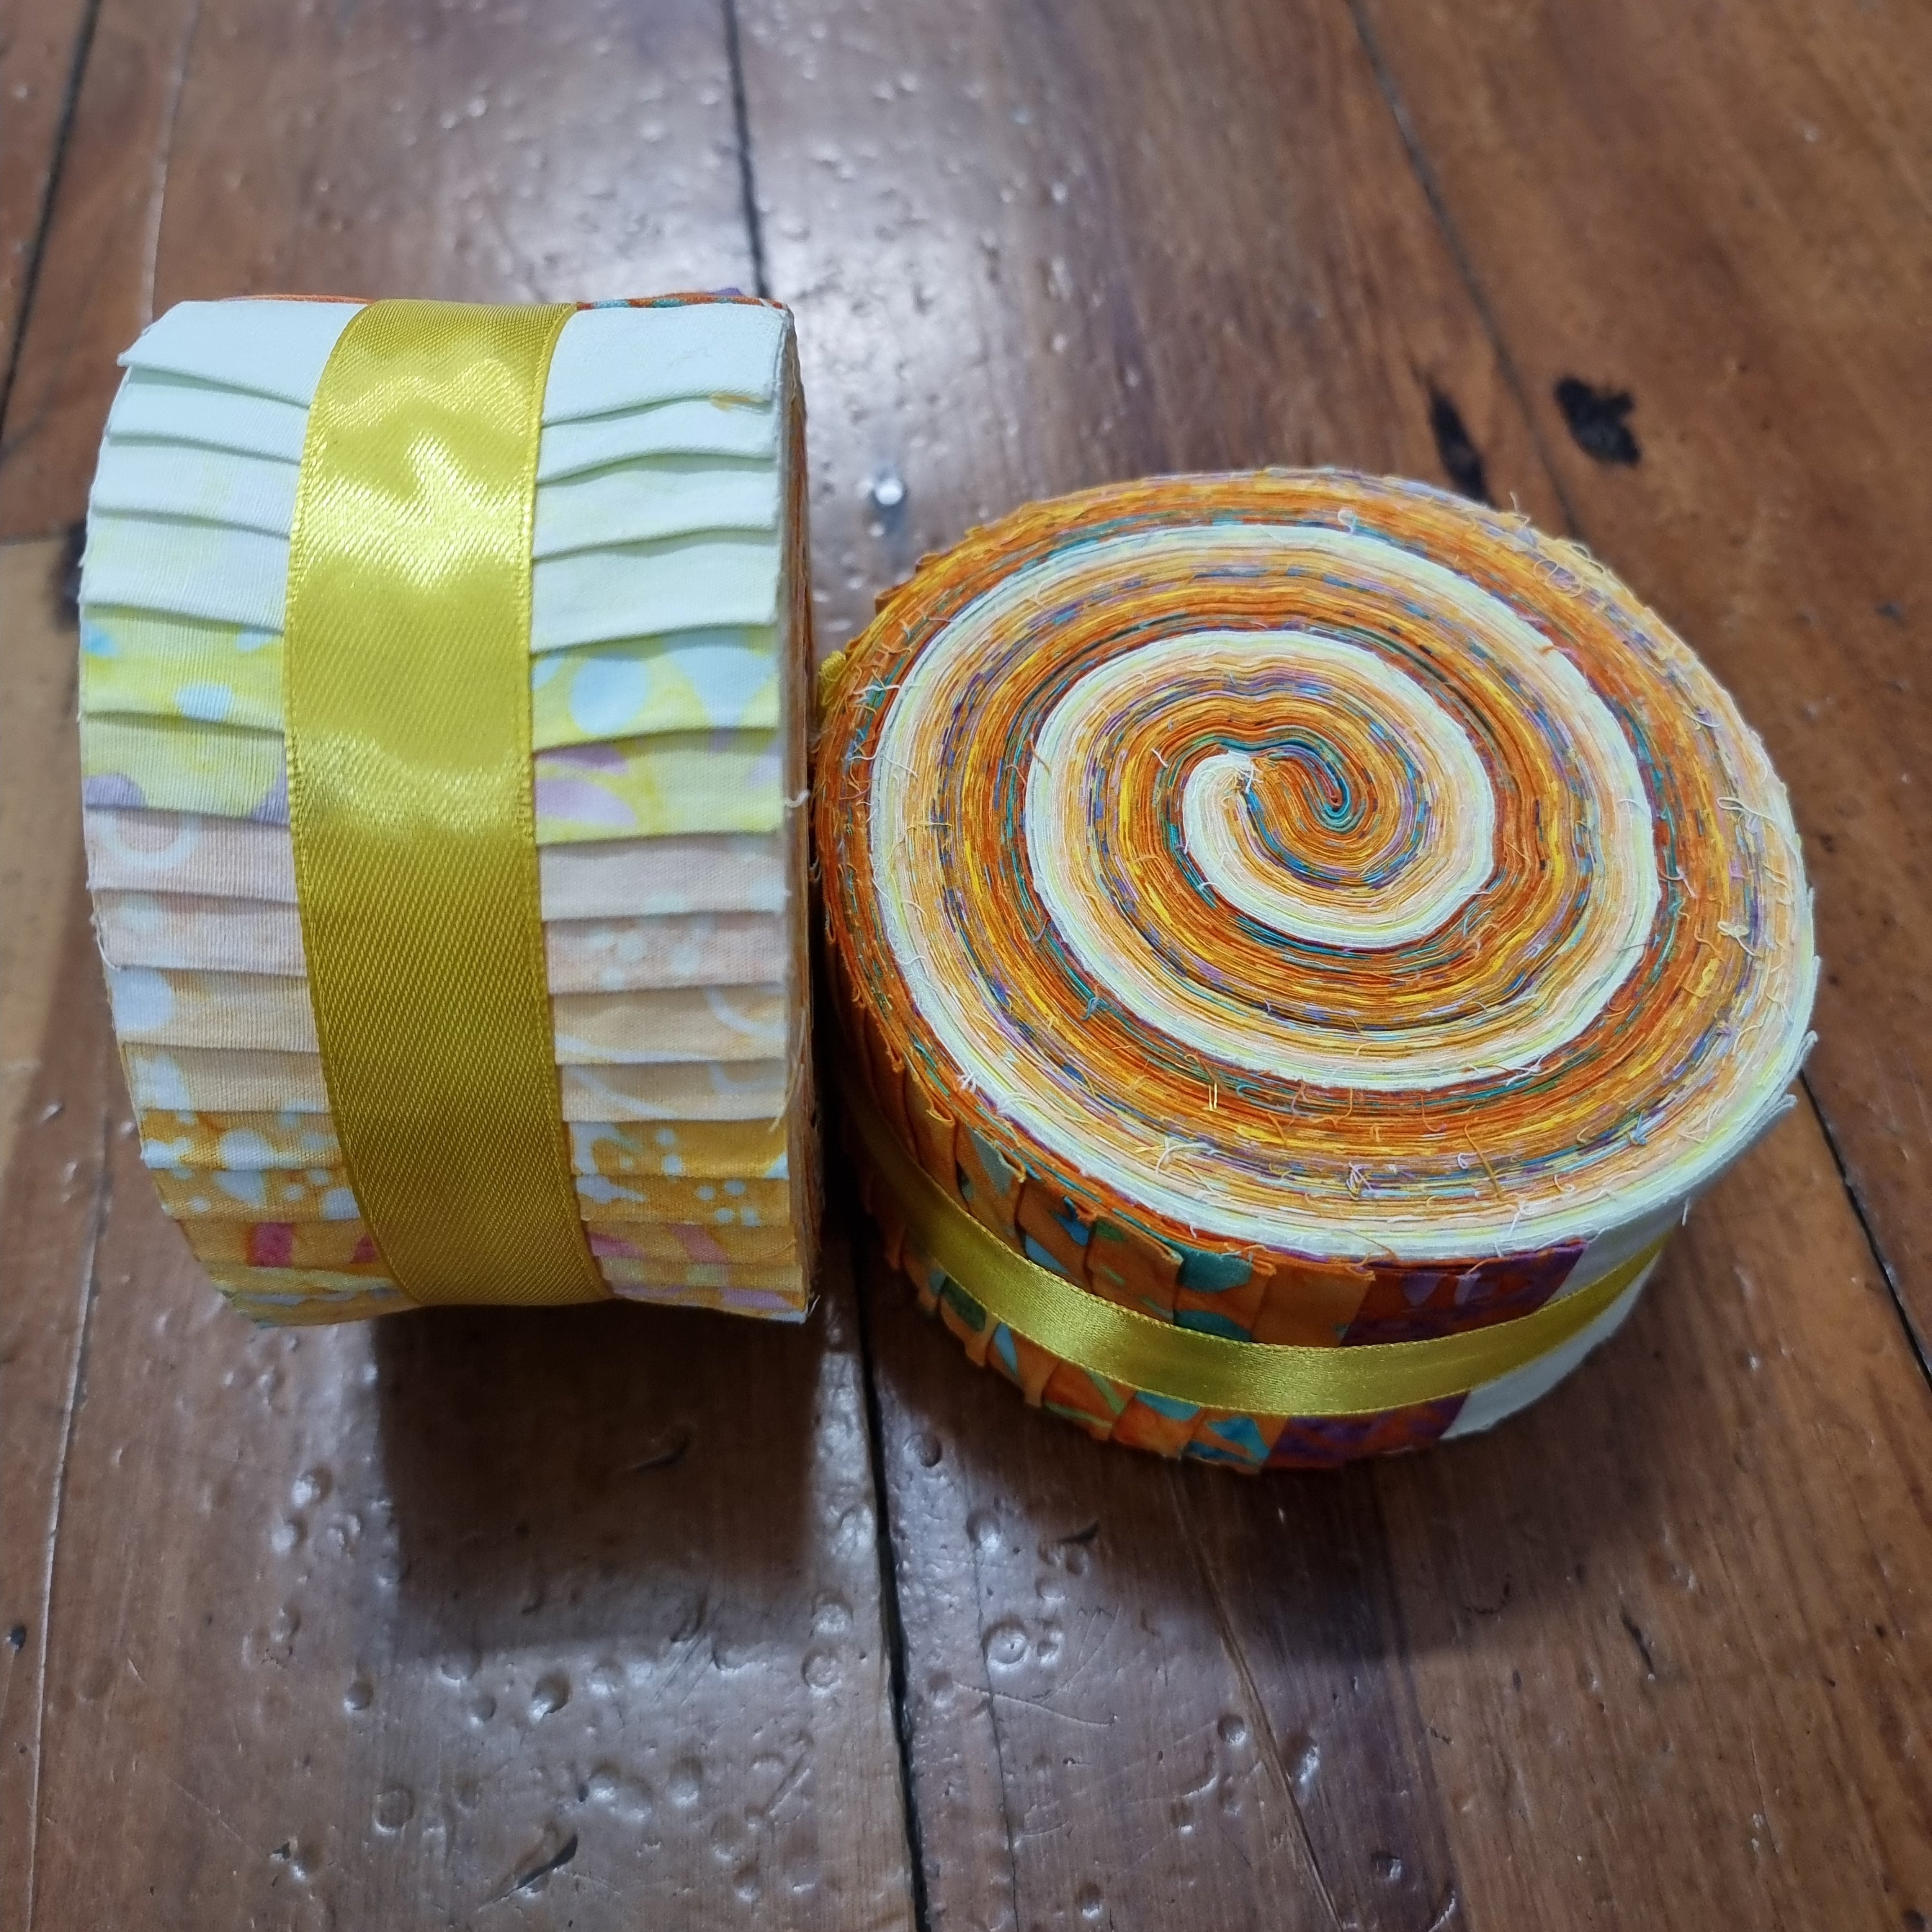 Patterned Yellow Jelly Rolls